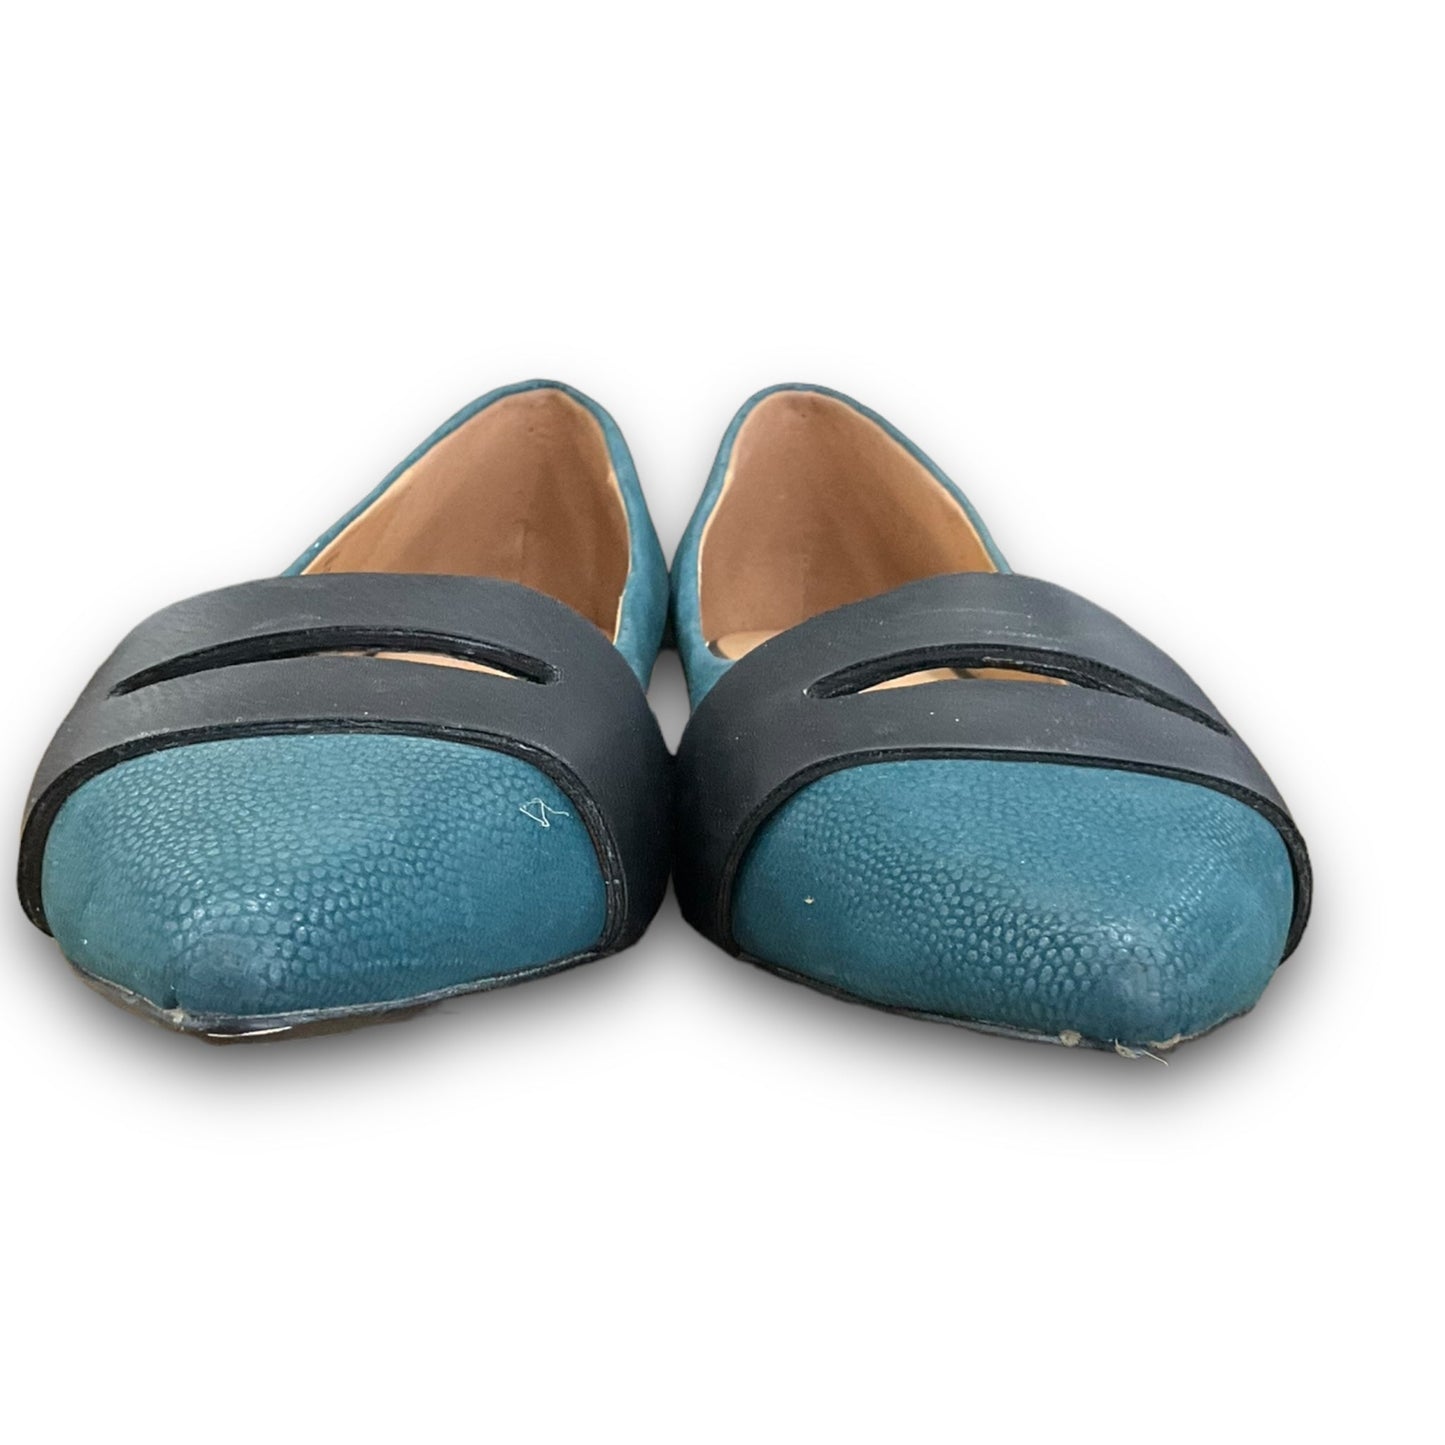 Shoes Flats By Just Fab  Size: 8